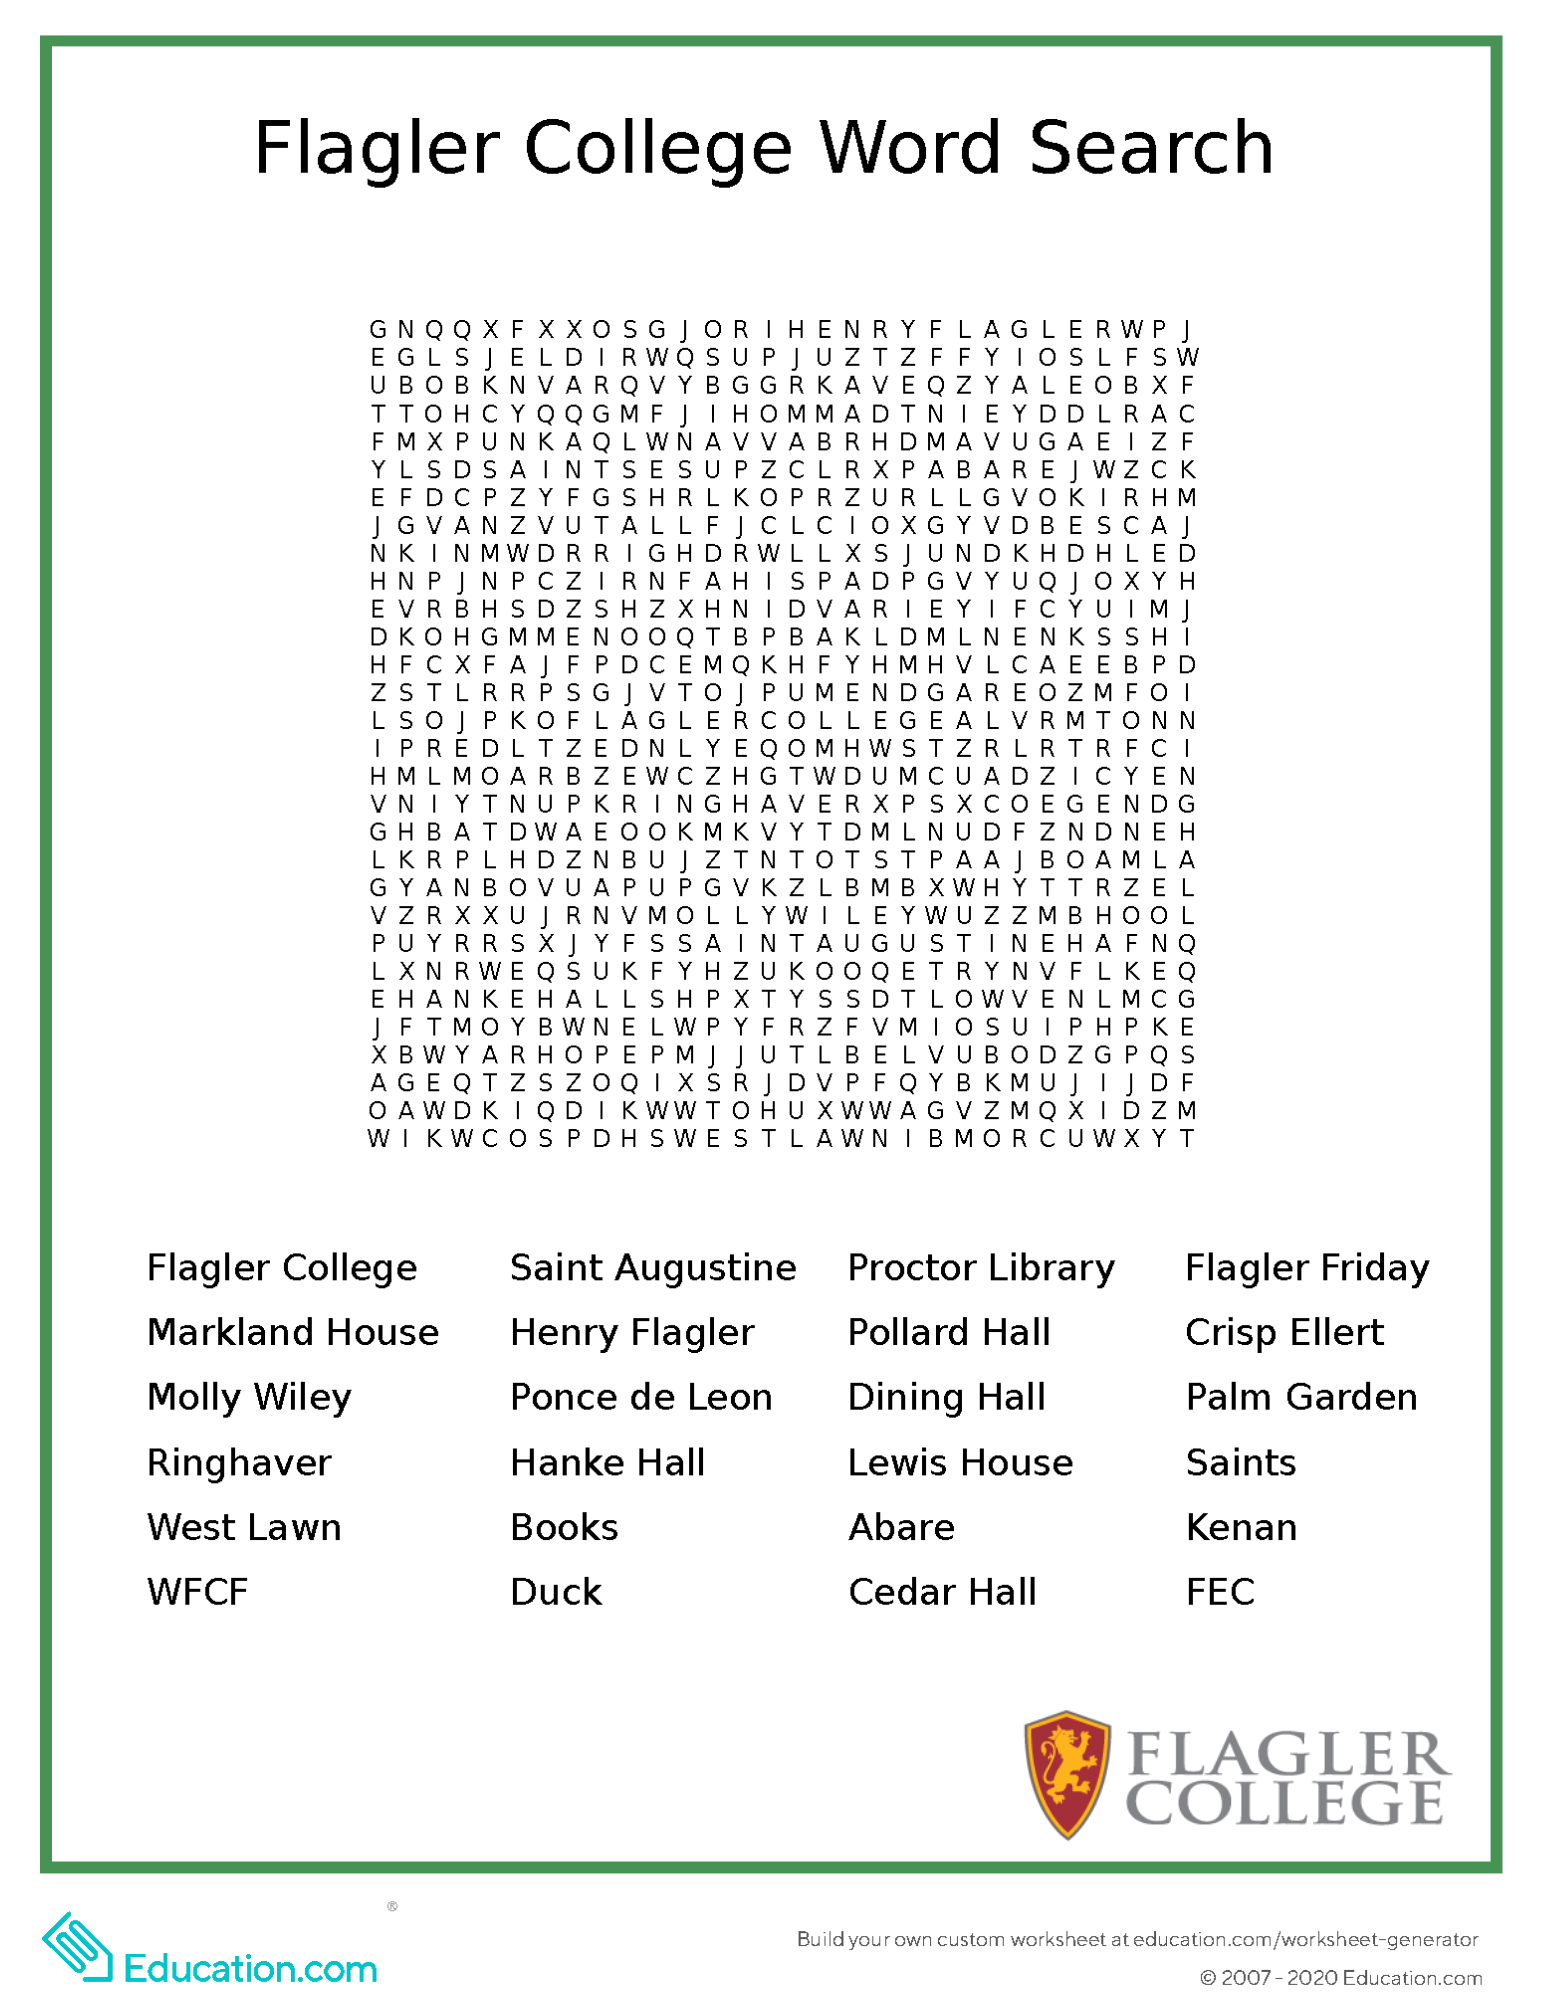 Flagler College Word Search